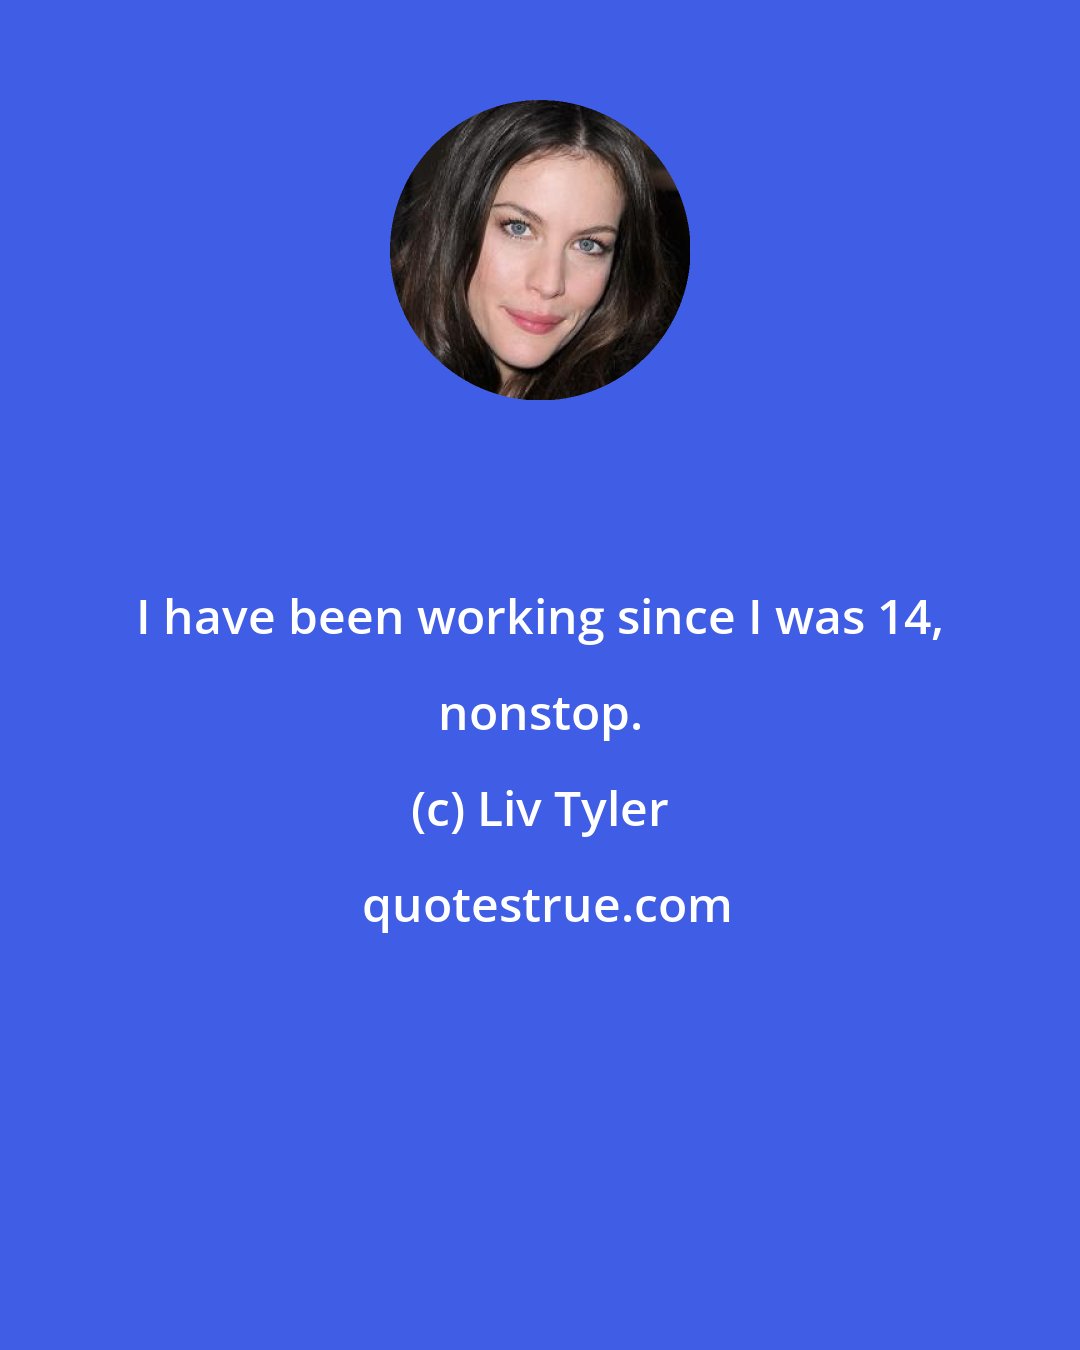 Liv Tyler: I have been working since I was 14, nonstop.